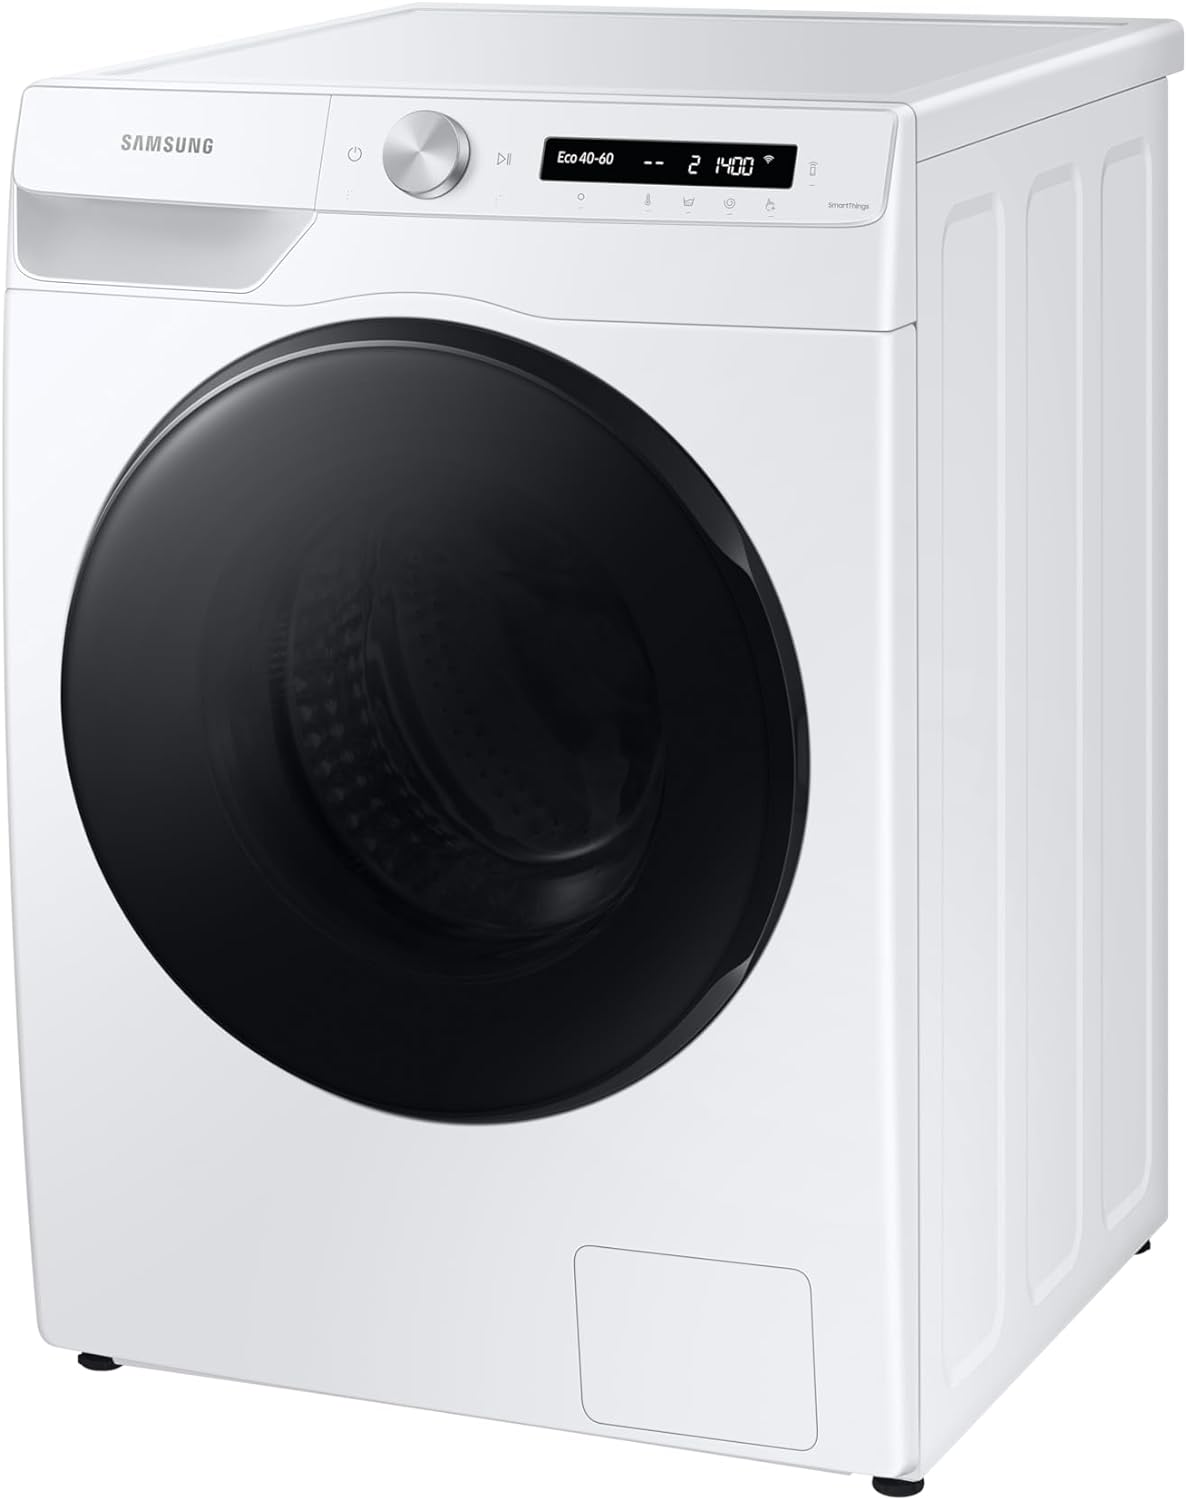 Samsung Series 5+ WD80T534DBW/S1 with Auto Dose Freestanding Washer Dryer, 8/5 kg 1400 rpm, White, E Rated - Amazing Gadgets Outlet